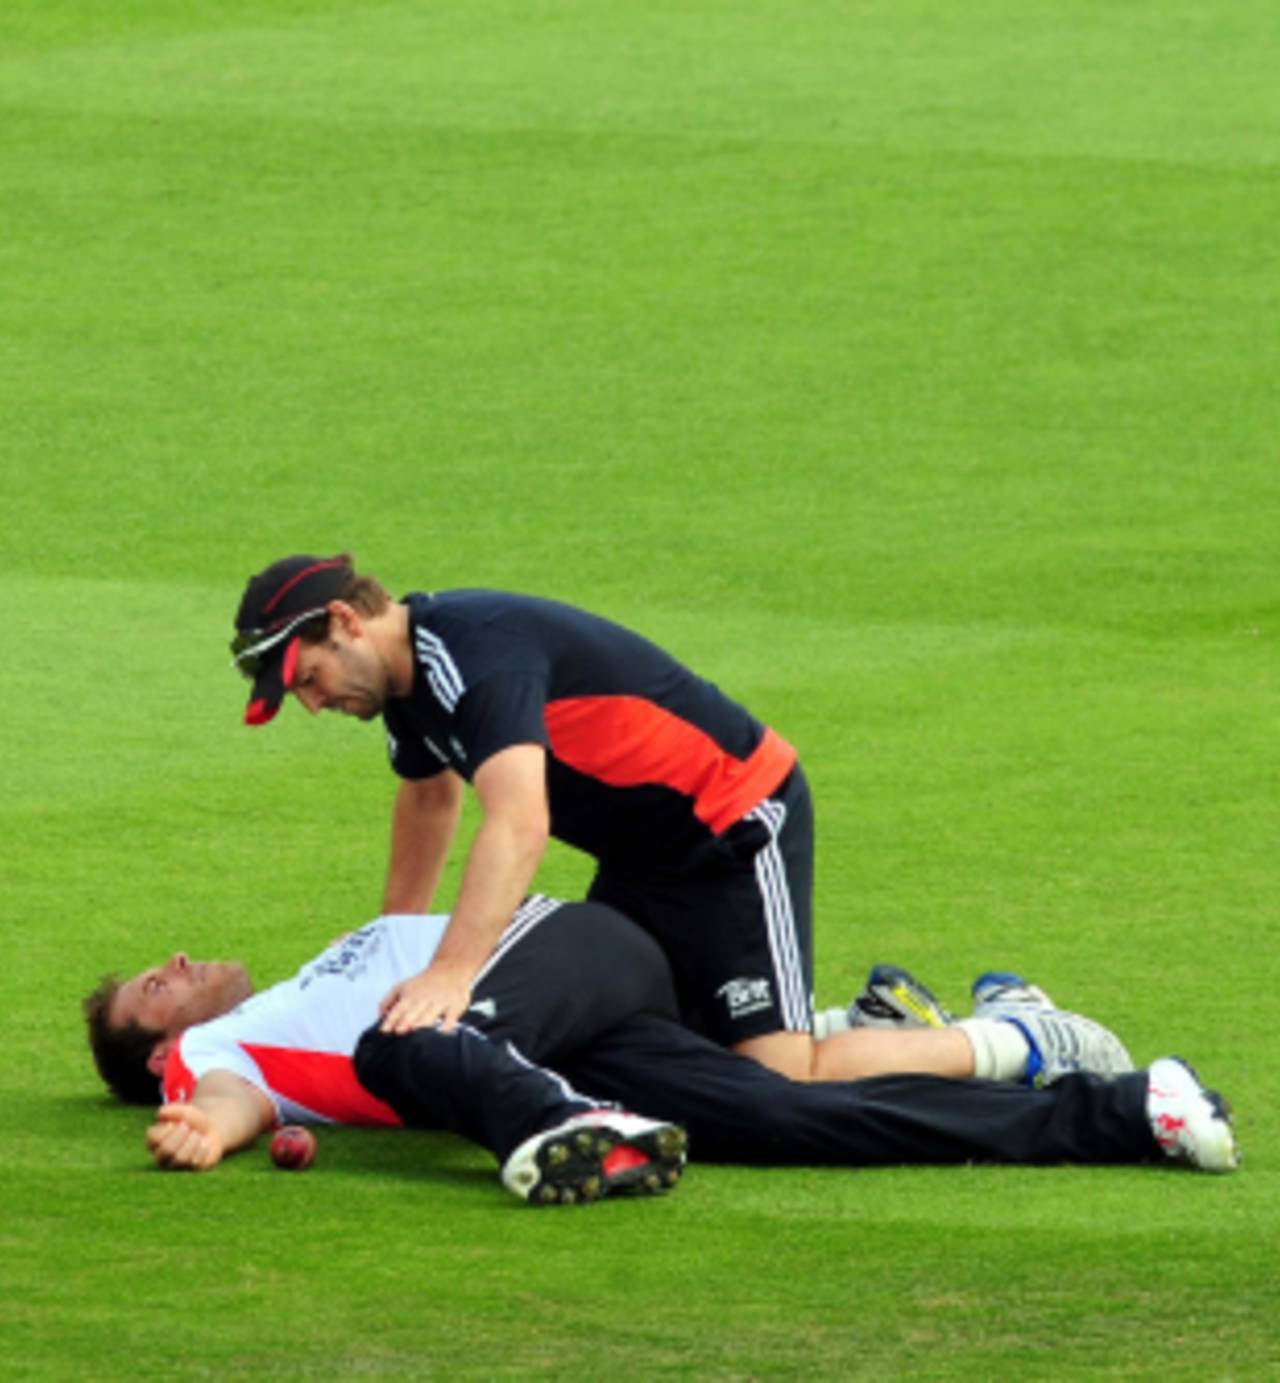 Chris Tremlett had plenty of attention from England's physio during the training session, Nottingham, July 28, 2011